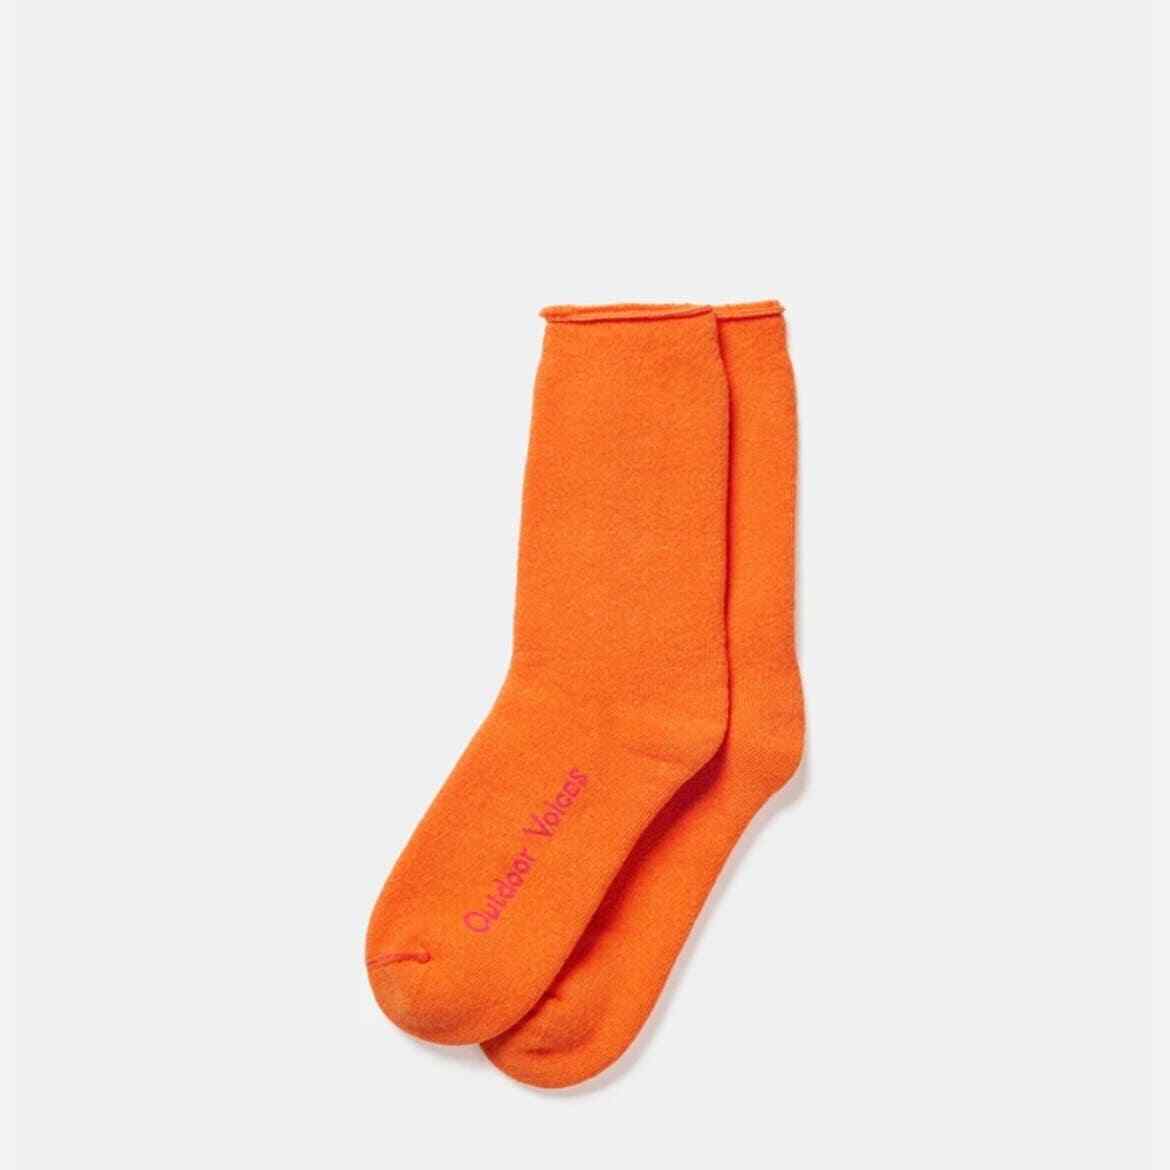 Primary image for Outdoor Voices Comfort Sock - Clementine Size S/M New One Pair